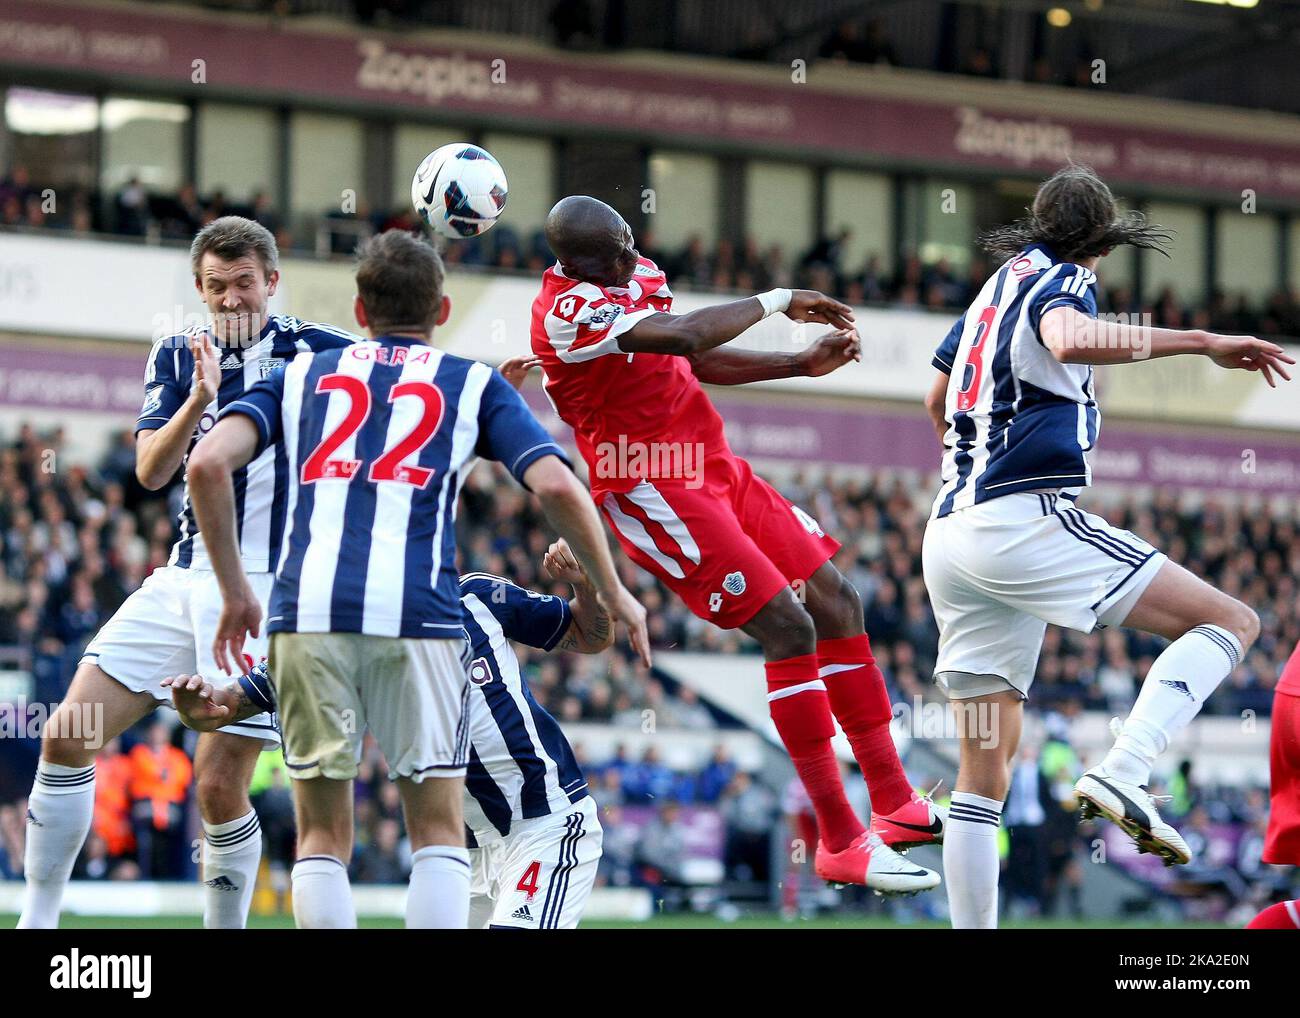 6th October 2012 - Barclays Premier League - West Bromwich Albion vs. Queens Park Rangers - Stephane Mbia of Queens Park Rangers heads at goal from a corner only to see it drift just wide - Photo: Paul Roberts/Pathos. Stock Photo